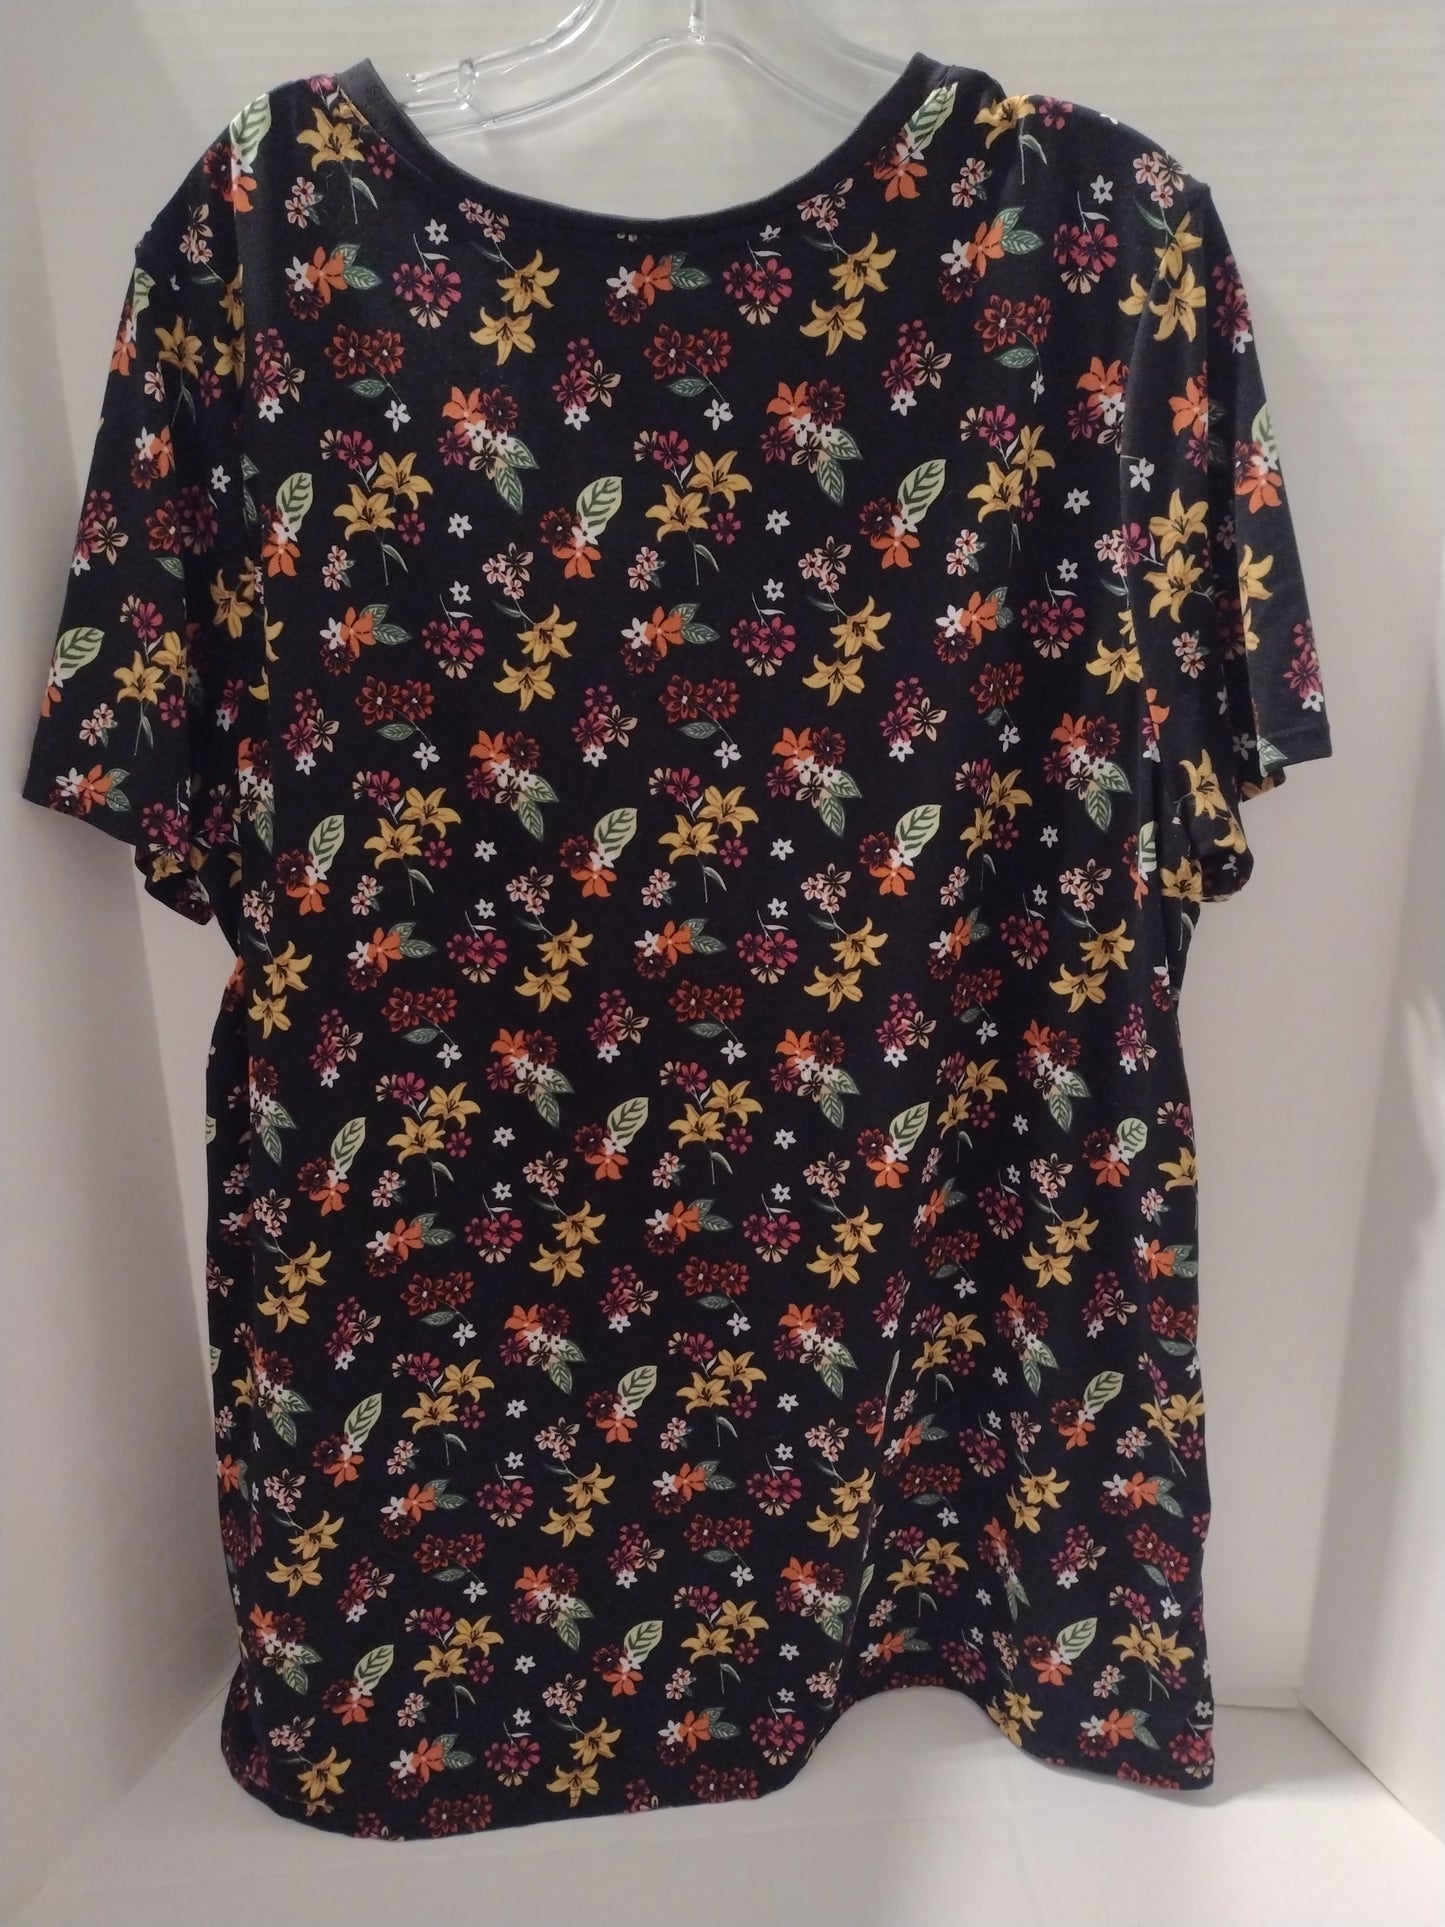 Top Short Sleeve By Cuddl Duds  Size: L